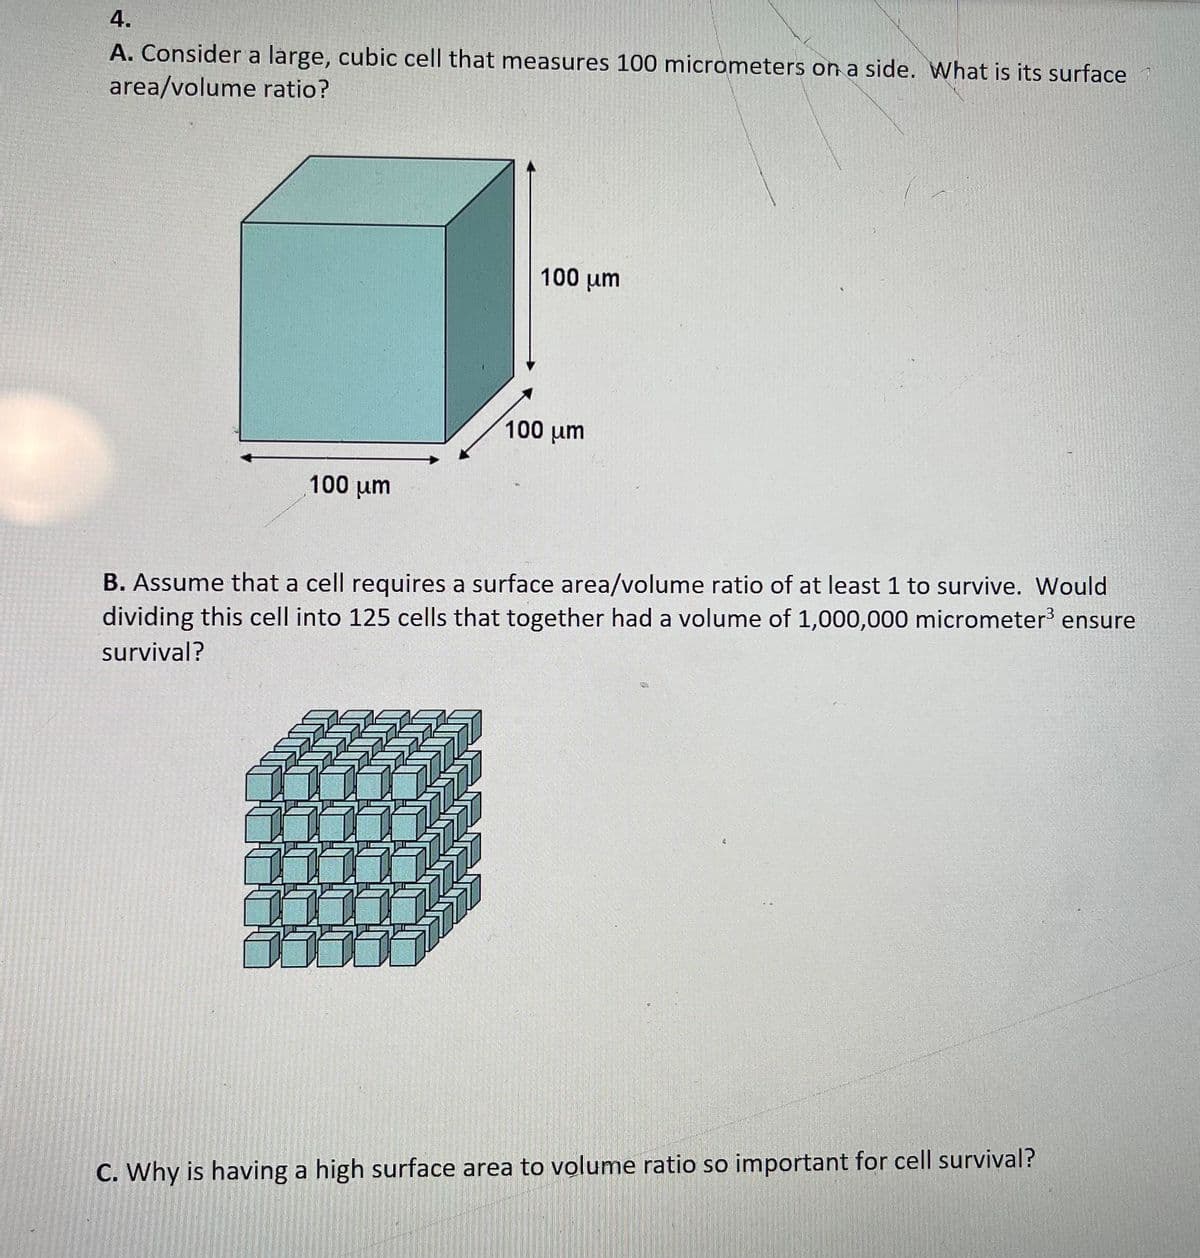 4.
A. Consider a large, cubic cell that measures 100 micrometers on a side. What is its surface
area/volume ratio?
100 um
100 um
100 um
B. Assume that a cell requires a surface area/volume ratio of at least 1 to survive. Would
dividing this cell into 125 cells that together had a volume of 1,000,000 micrometer ensure
survival?
C. Why is having a high surface area to volume ratio so important for cell survival?
